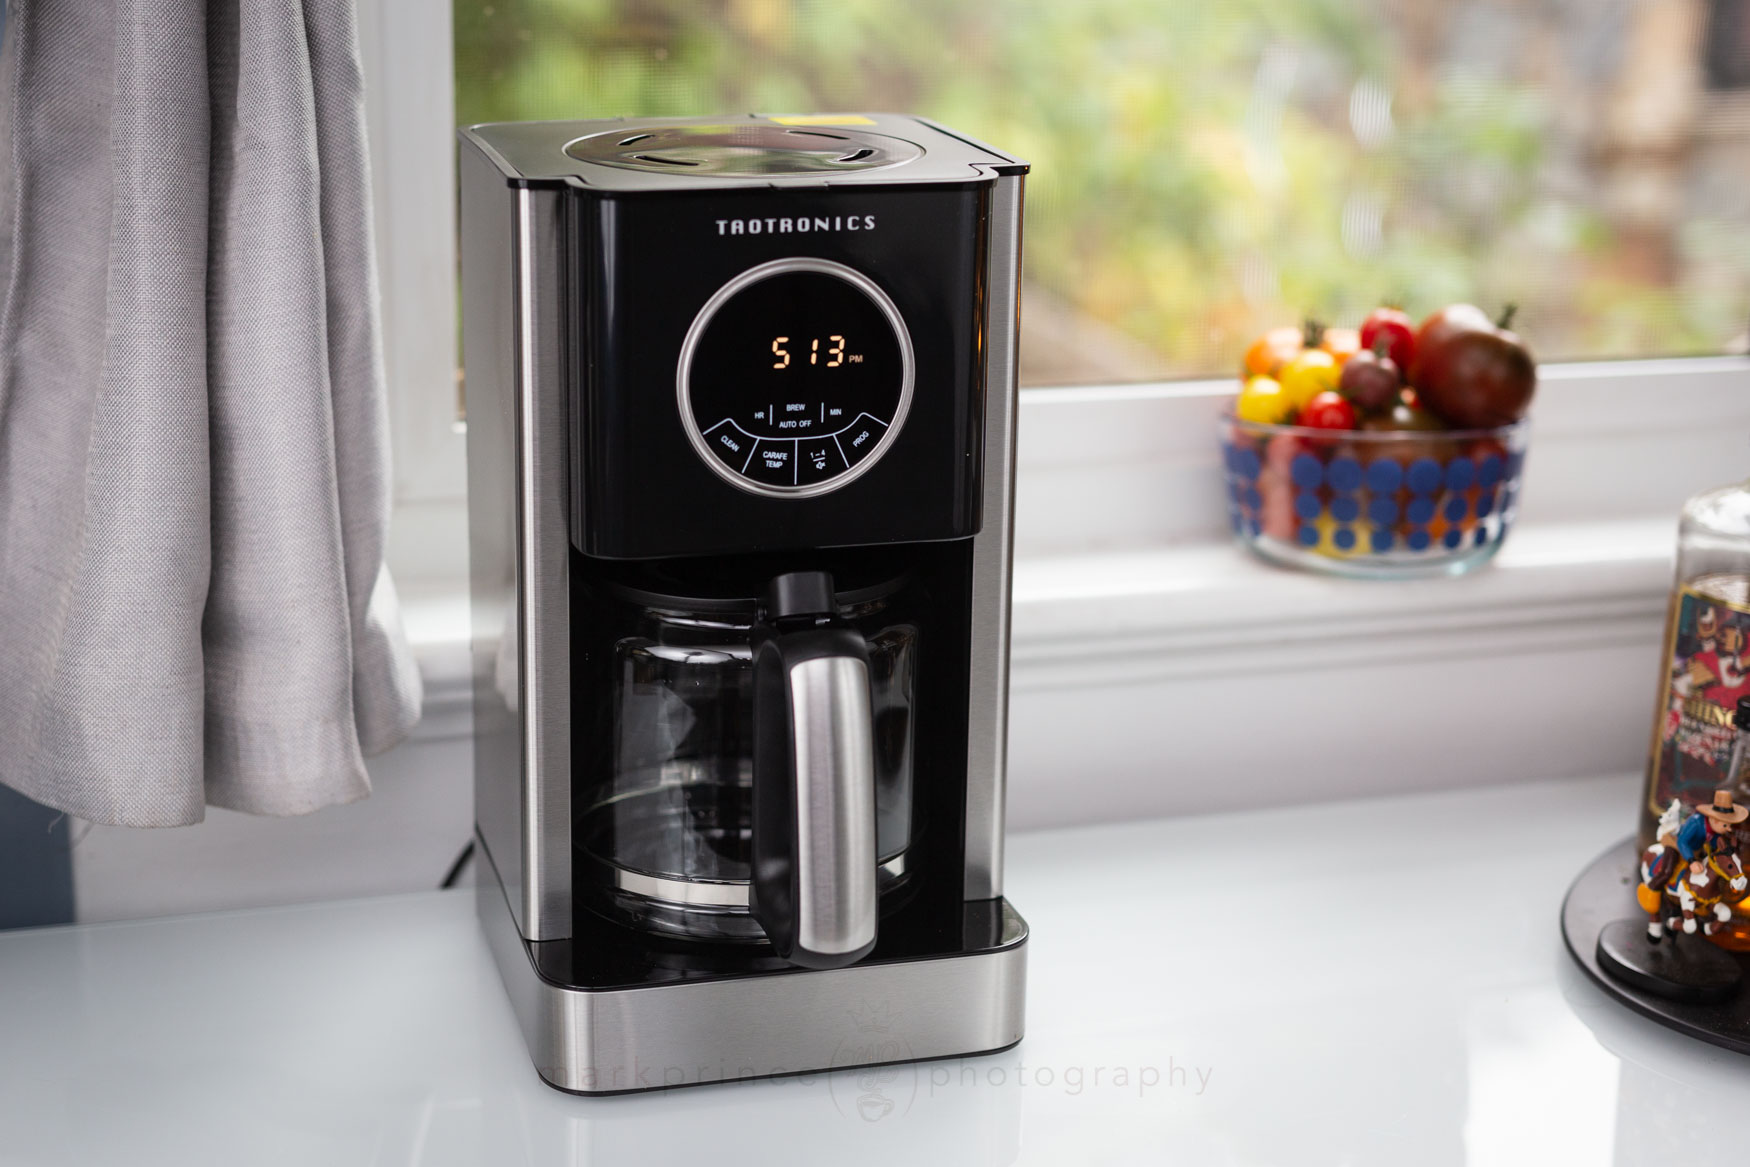 The 11 Best Thermal Carafe Coffee Makers of 2024, Tested & Reviewed